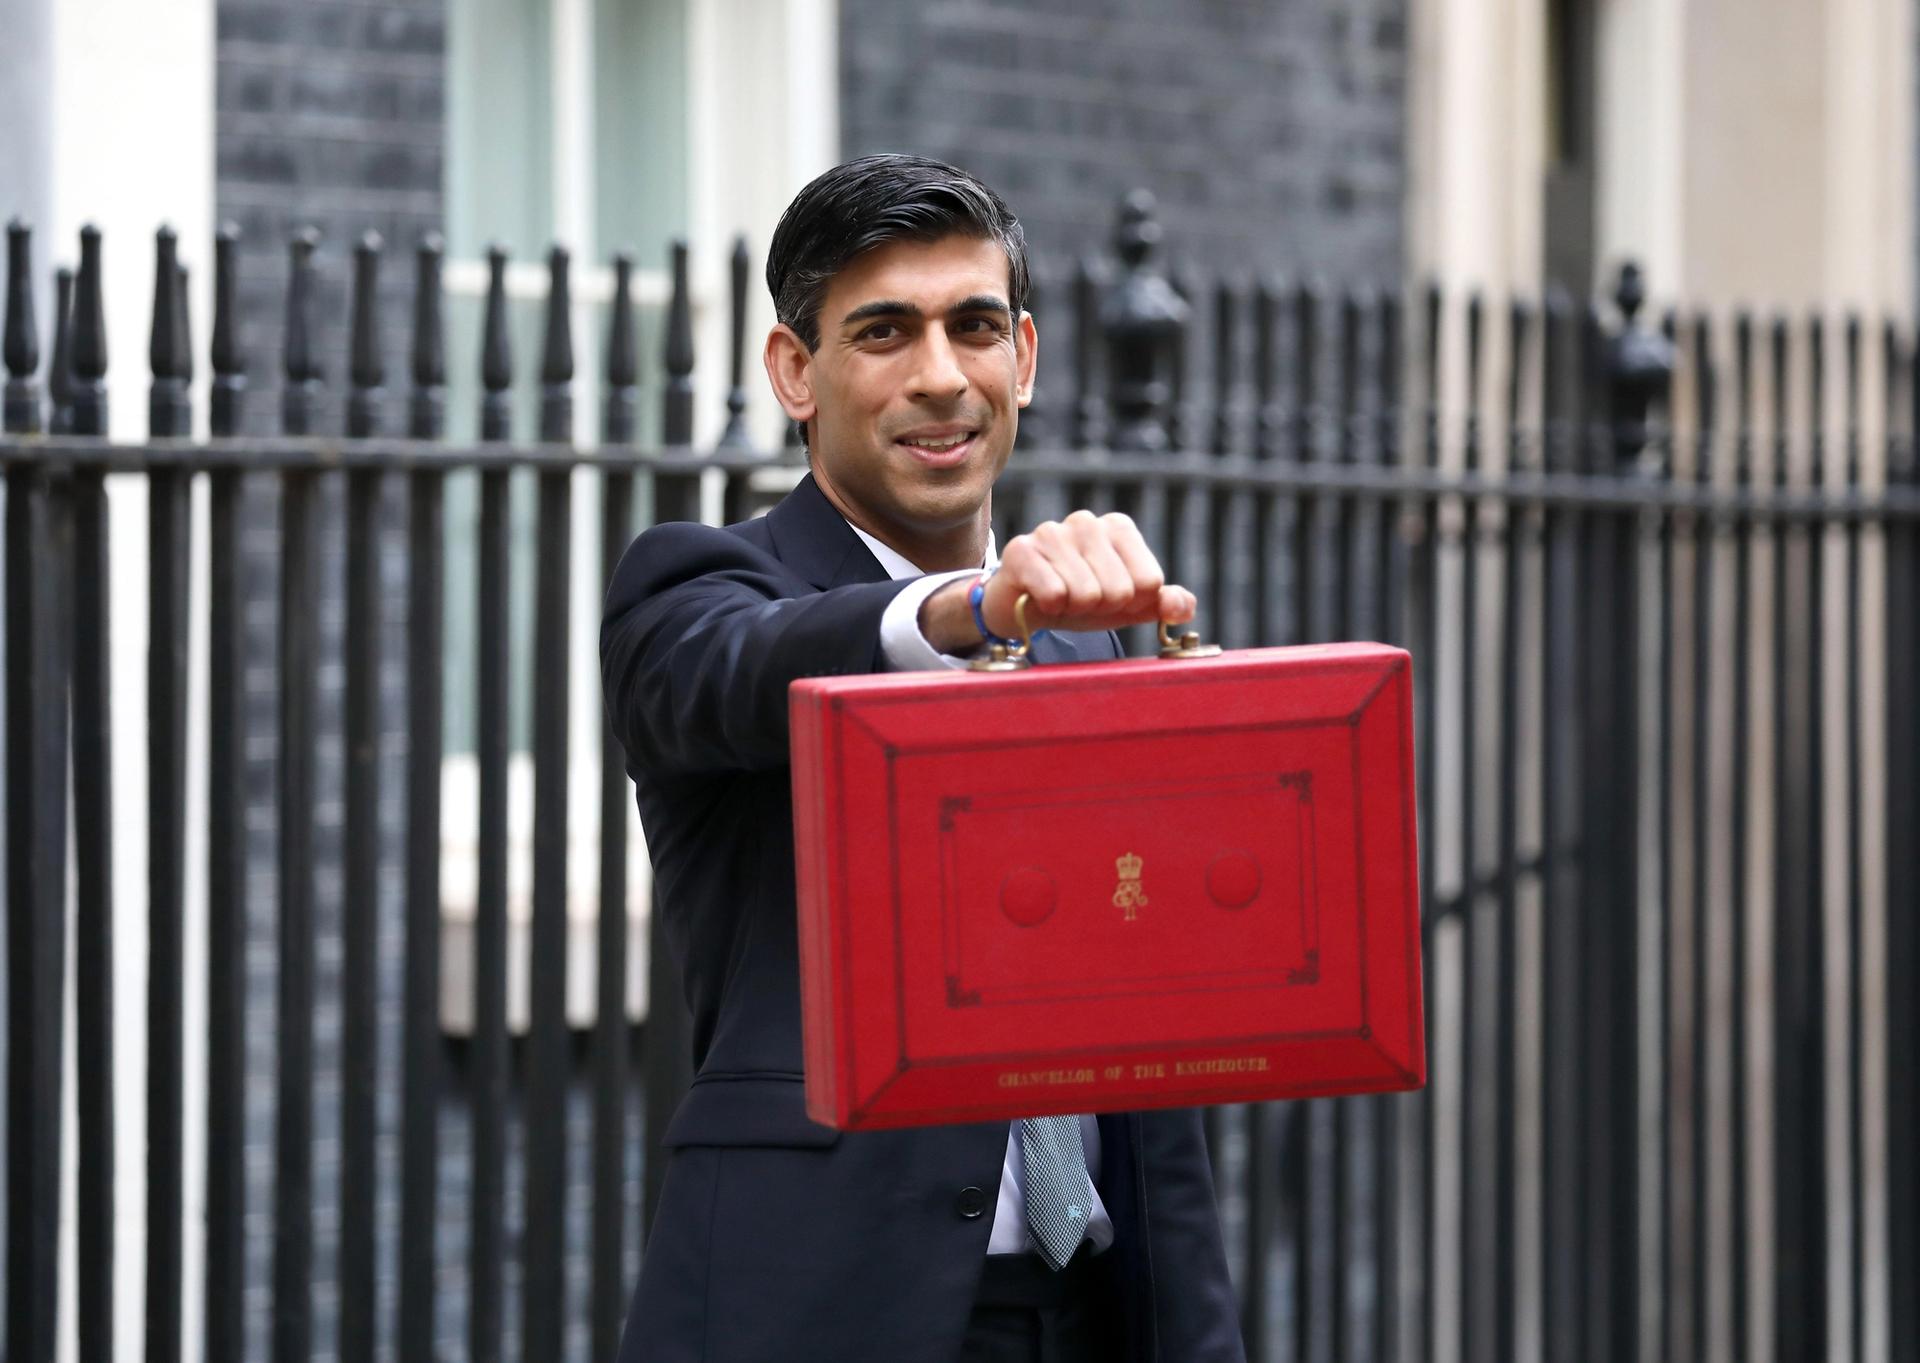 The UK's Chancellor of the Exchequer Rishi Sunak will announce the 2021 budget tomorrow © Paul Marriott/Alamy Live News